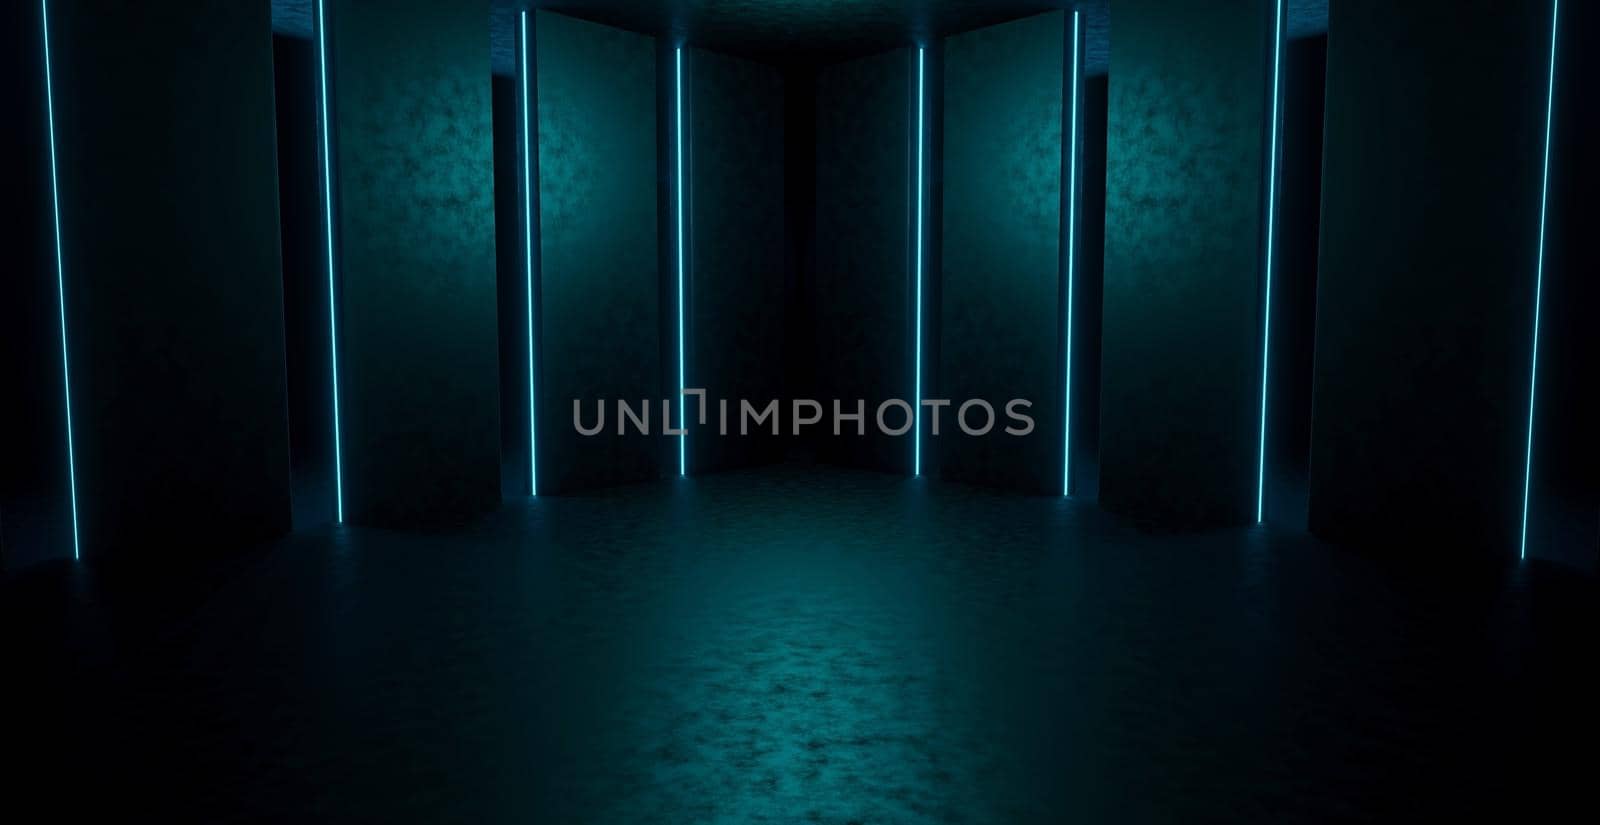 Extraterrestrial Empty Glowing Vibrant Laser Showcase Stage Corridor Hallway Entrance Dimmed Dark Blue Background Digital Futurism Concept For Product Backgrounds Presentation 3D Rendering